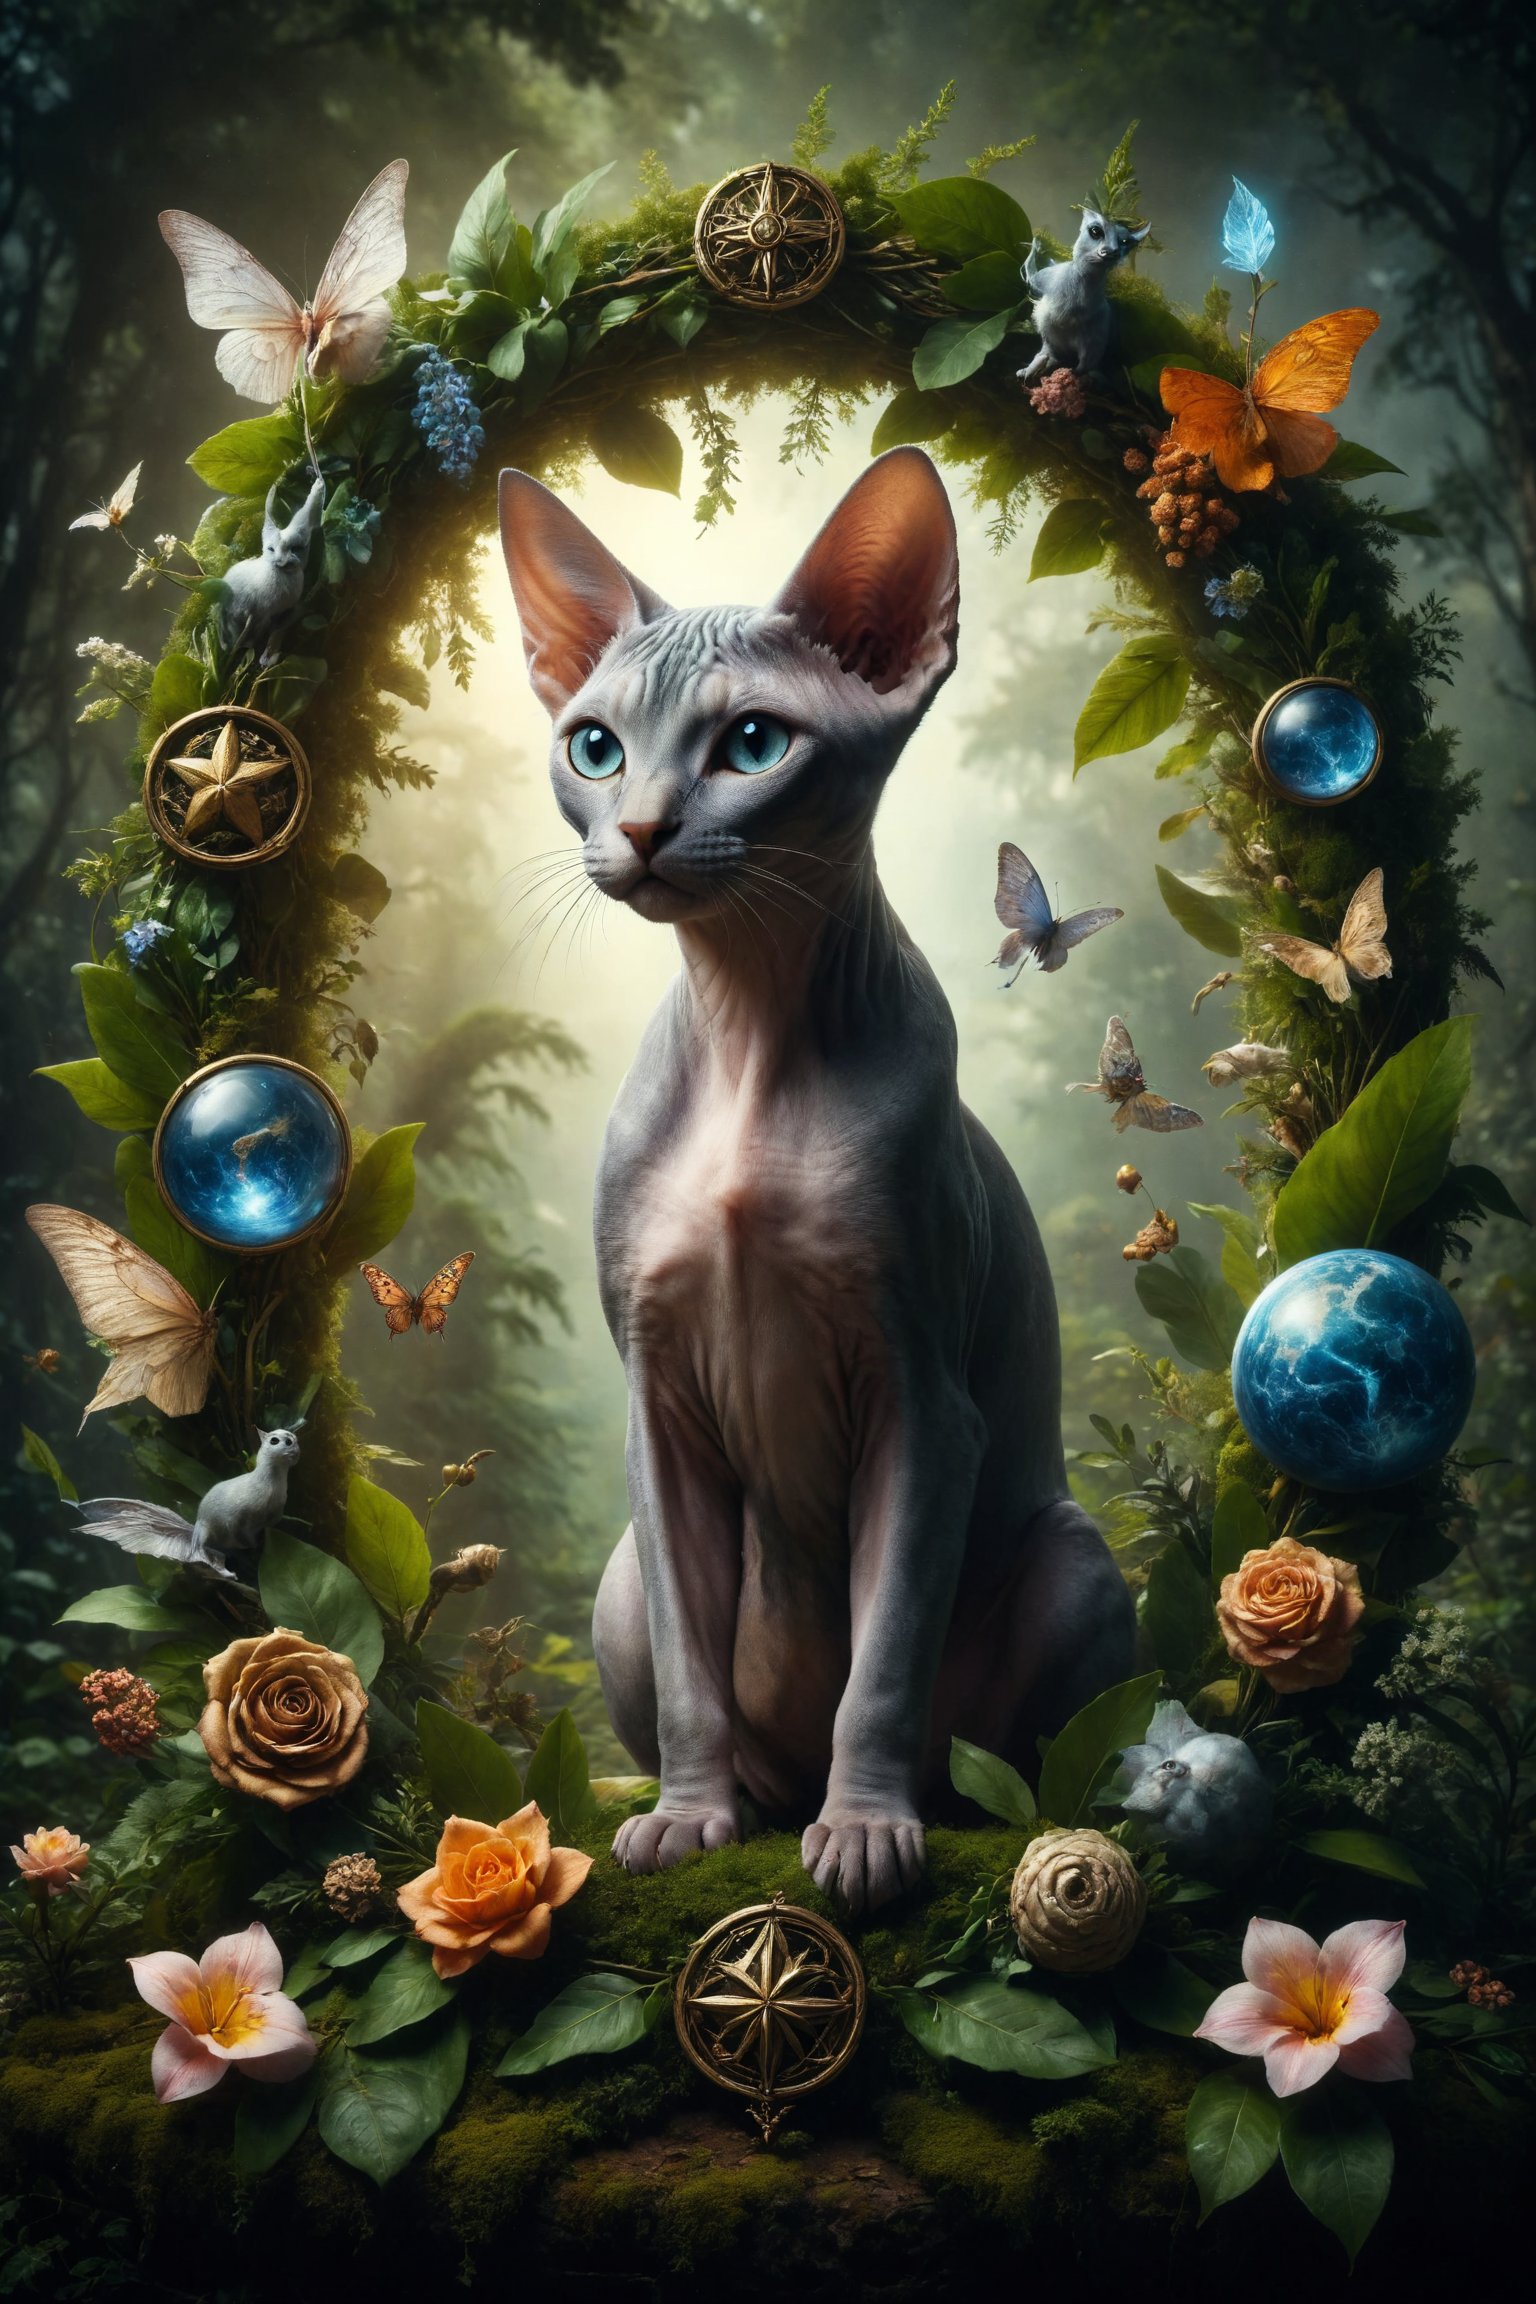 Generate a scene of a Sphynx cat at the center of a laurel wreath, surrounded by symbols of the four elements and mythical creatures, symbolizing completion, integration, and universal harmony.